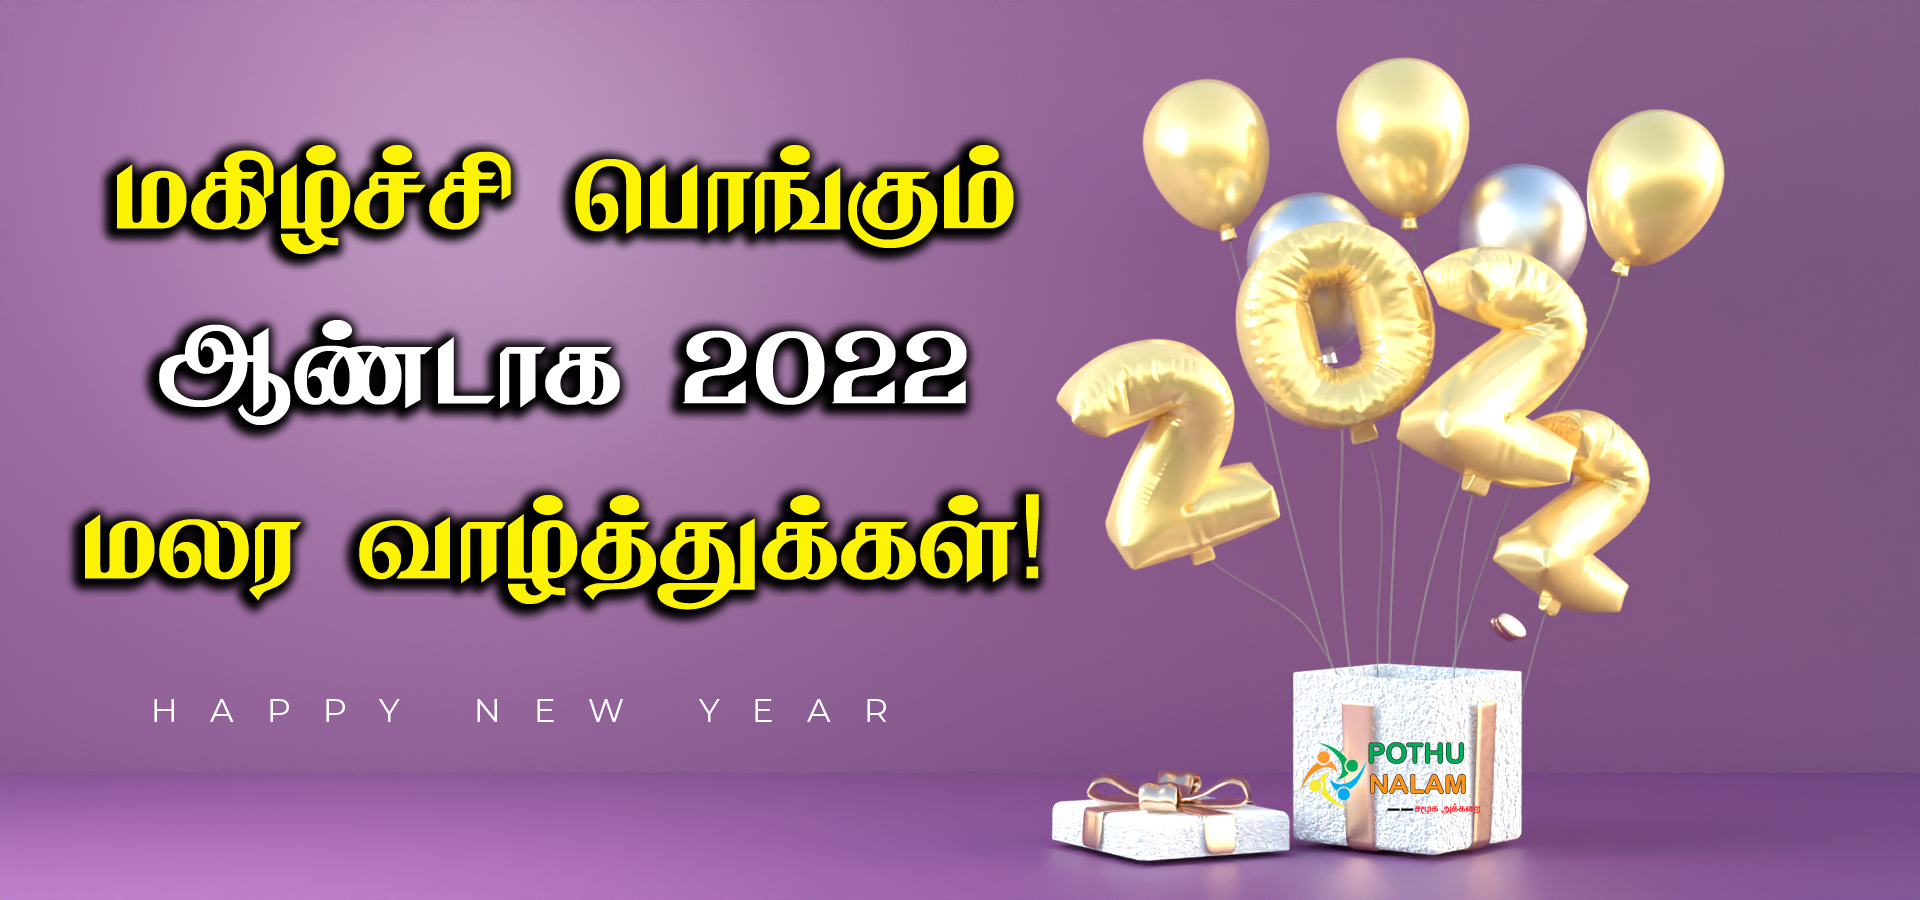 new year 2022 kavithai in tamil